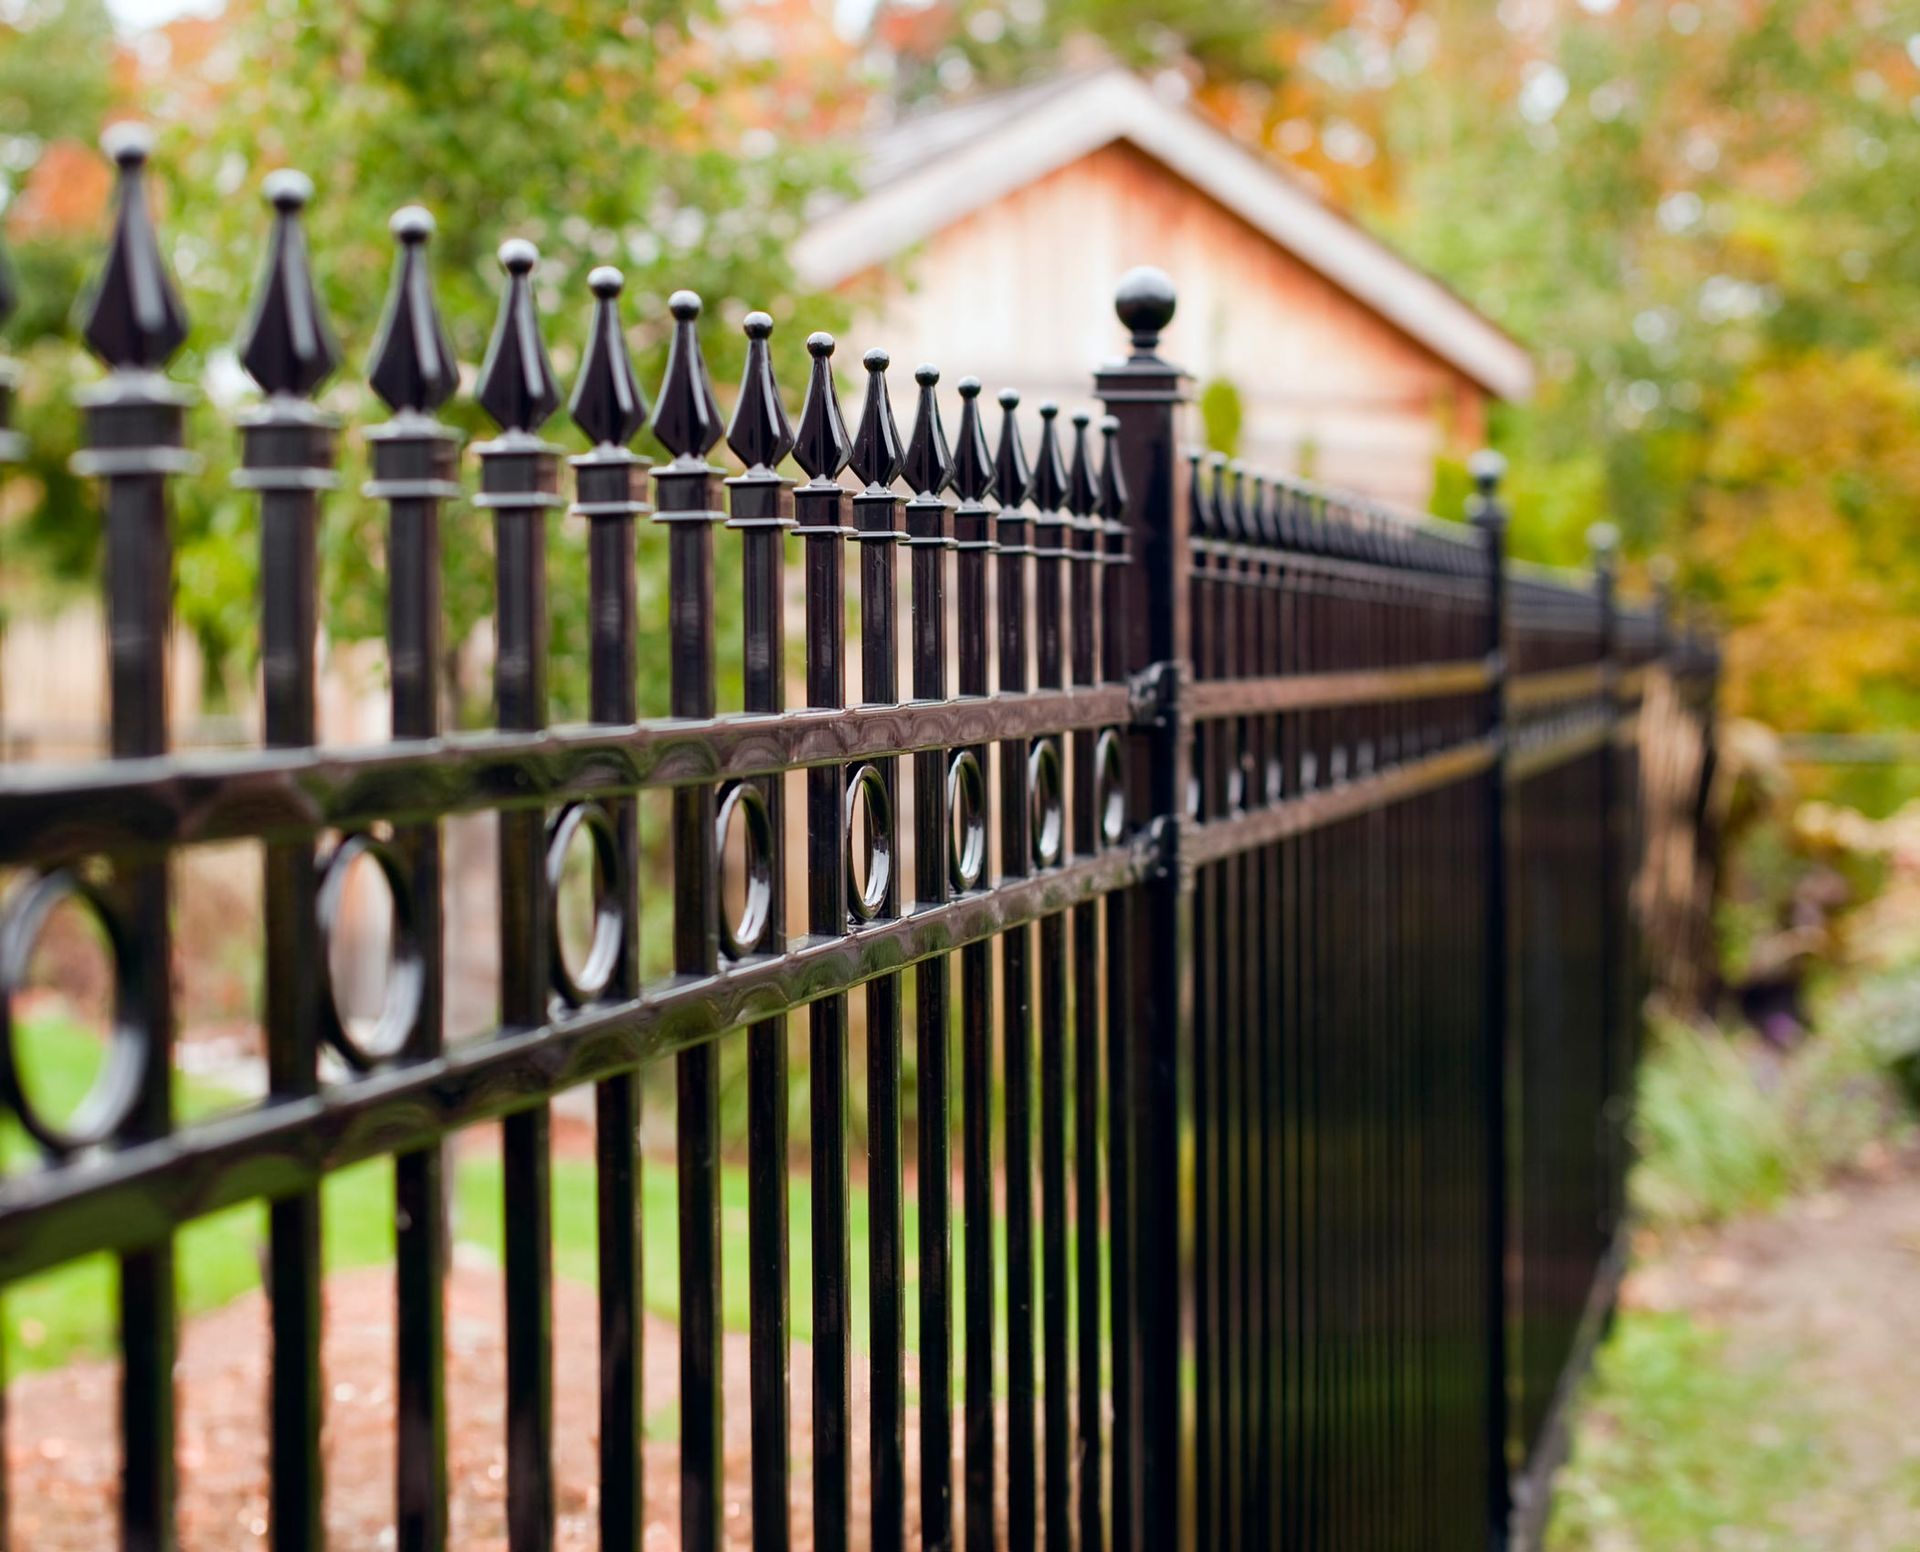 A black wrought iron fence with a house in the background.